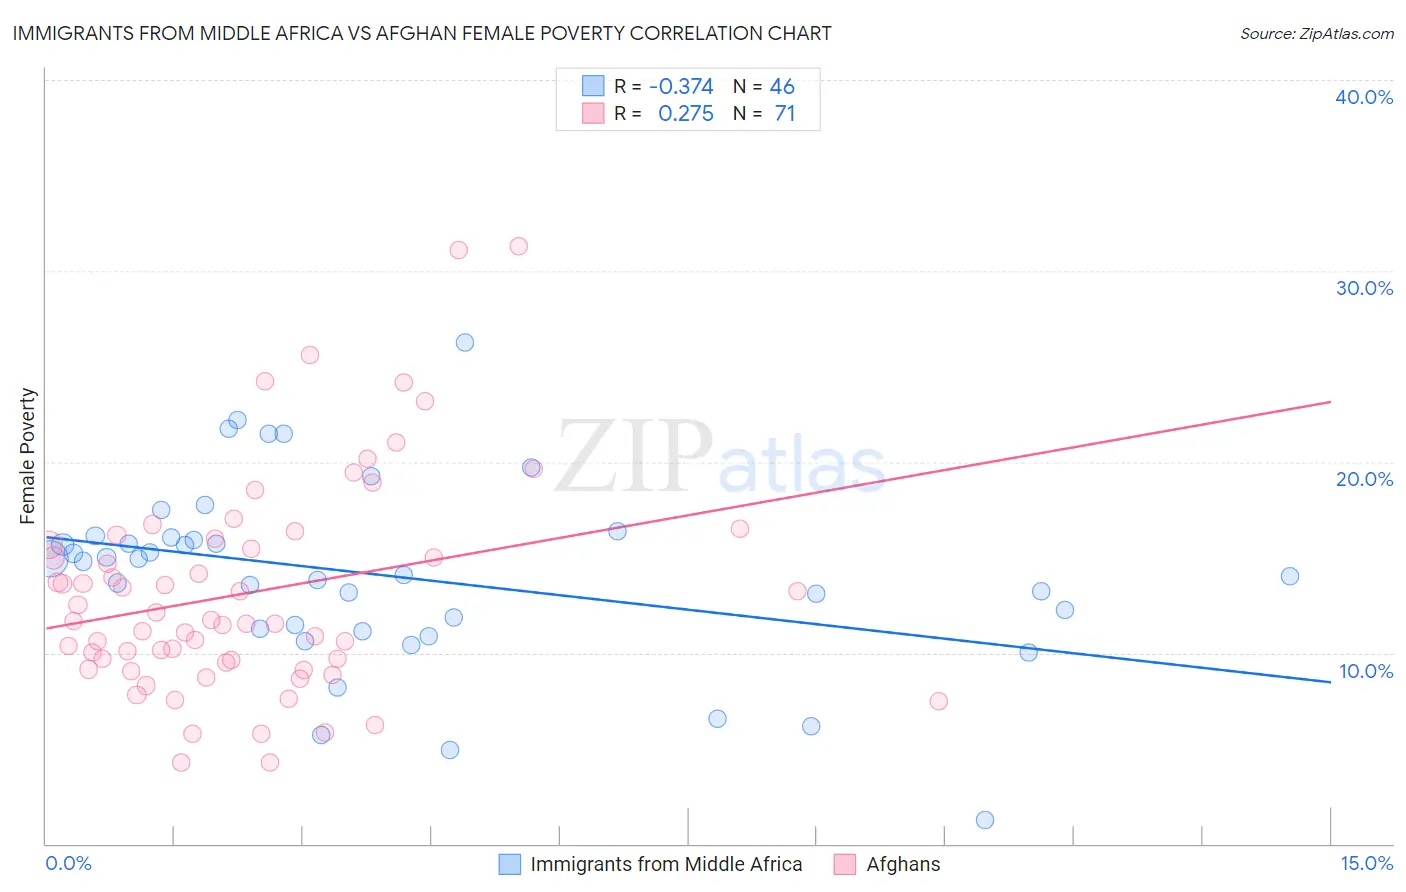 Immigrants from Middle Africa vs Afghan Female Poverty